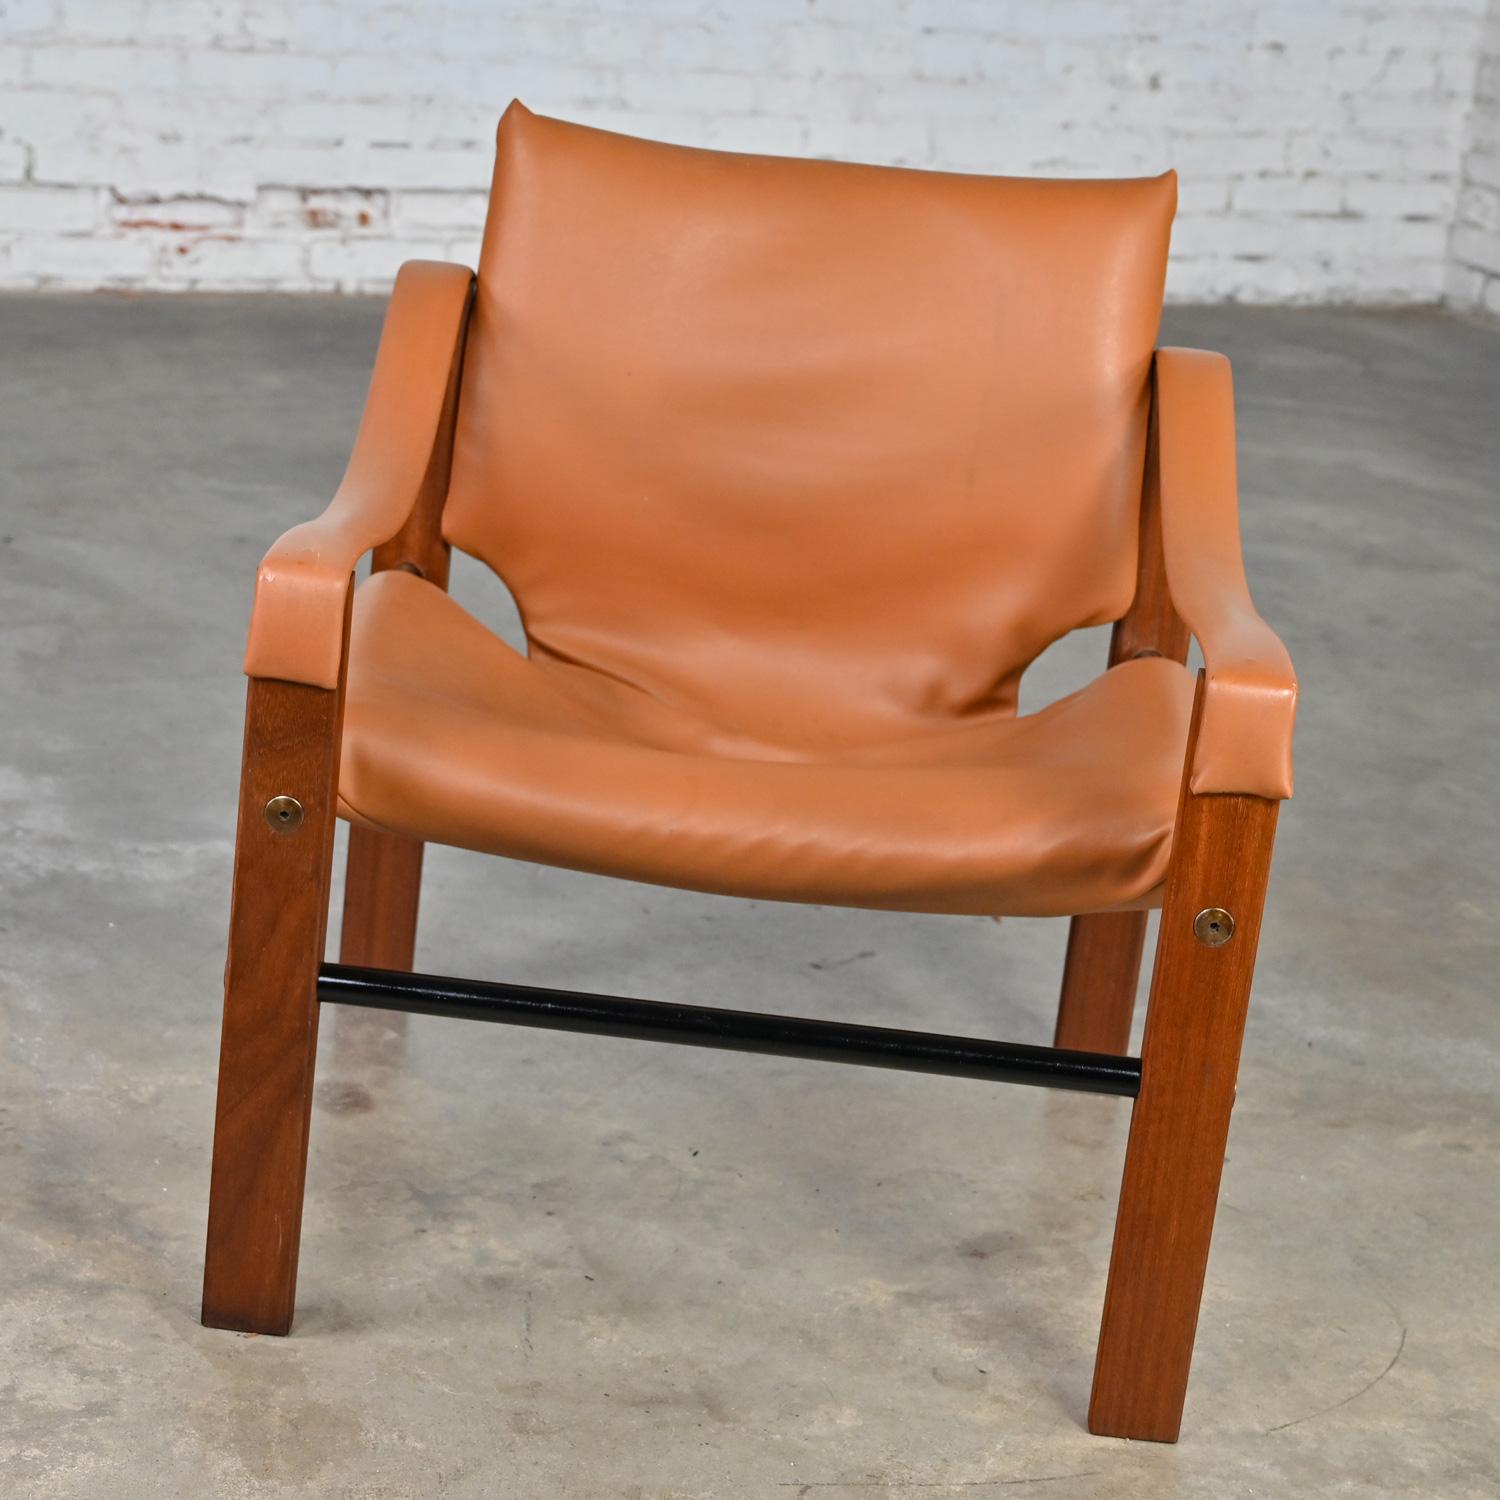 Fantastic vintage Chelsea Safari Chair designed by Maurice Burke for Arkana Furniture wearing its original cognac faux leather or vinyl with a teak frame, tubular black metal runners, and steel screw details.  Beautiful condition, keeping in mind